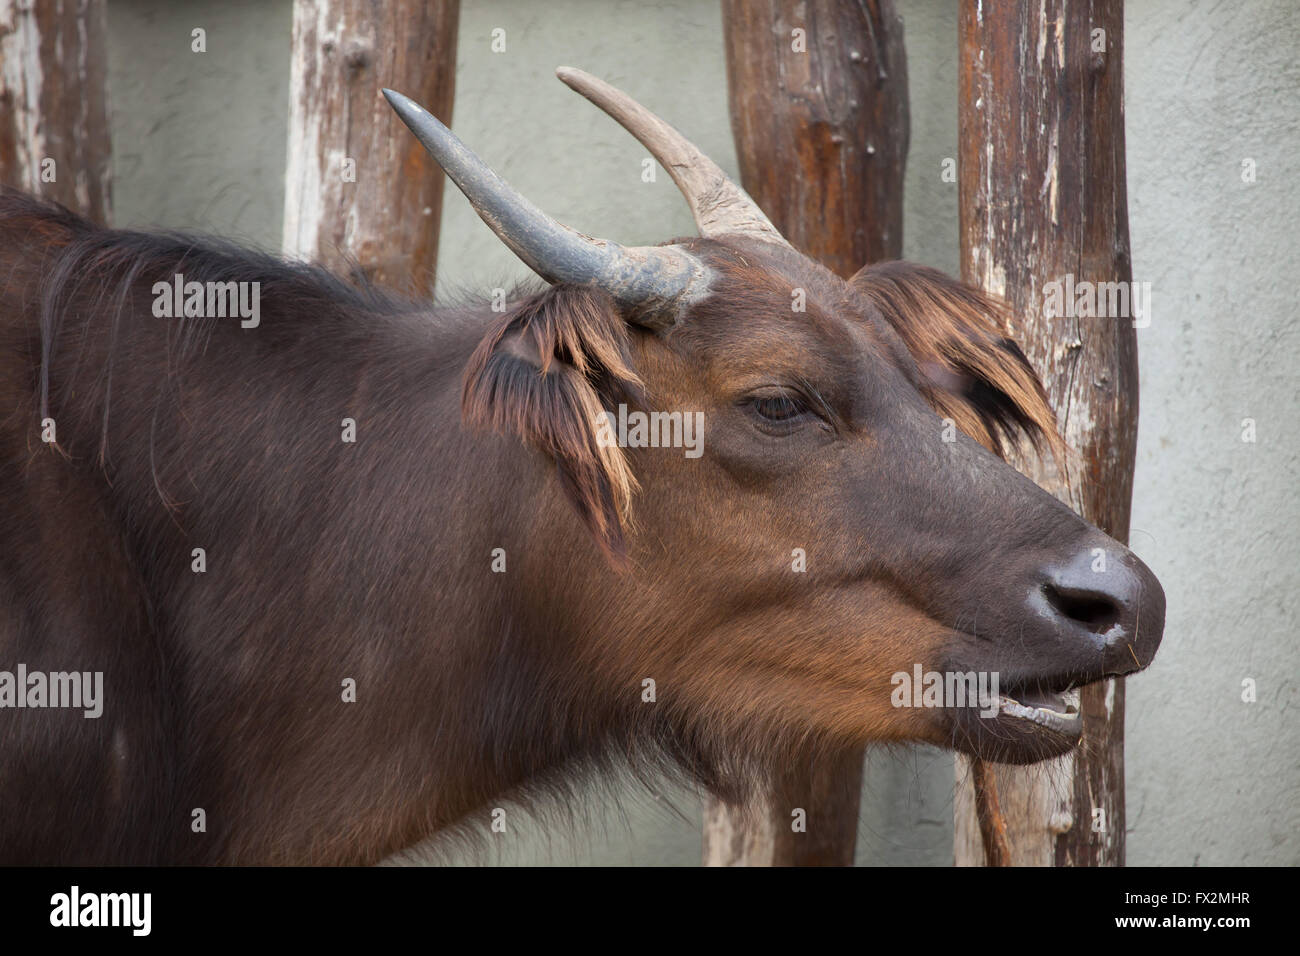 African forest buffalo (Syncerus caffer nanus), also known as the red buffalo or dwarf buffalo. Stock Photo